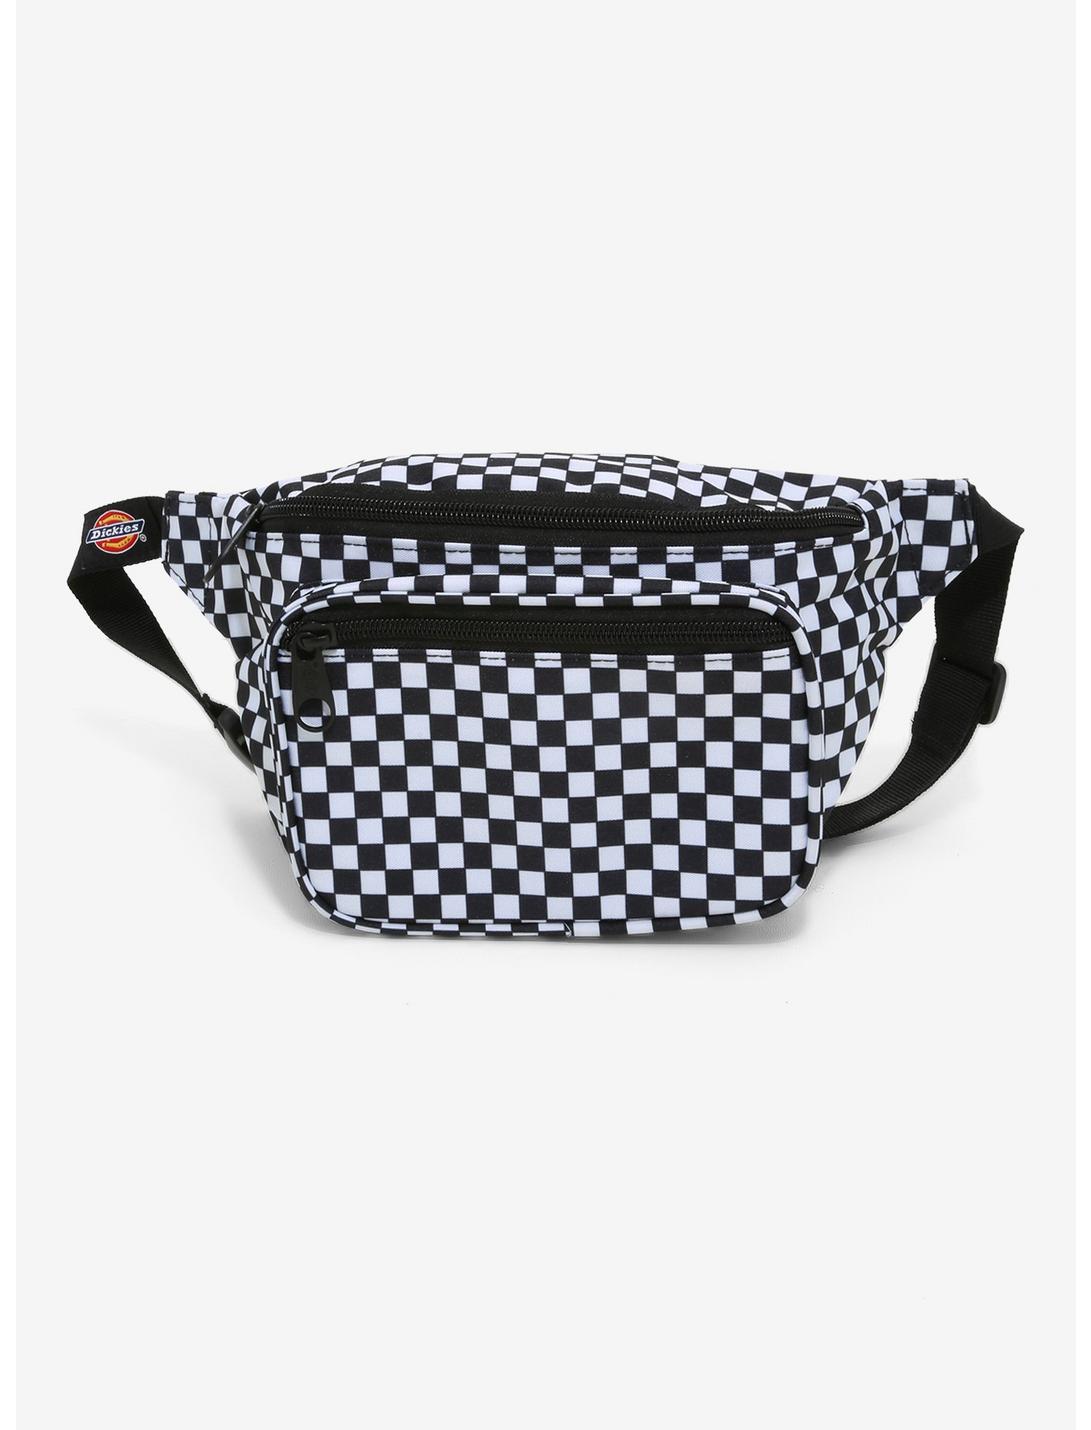 Dickies Black & White Checkered Fanny Pack, , hi-res